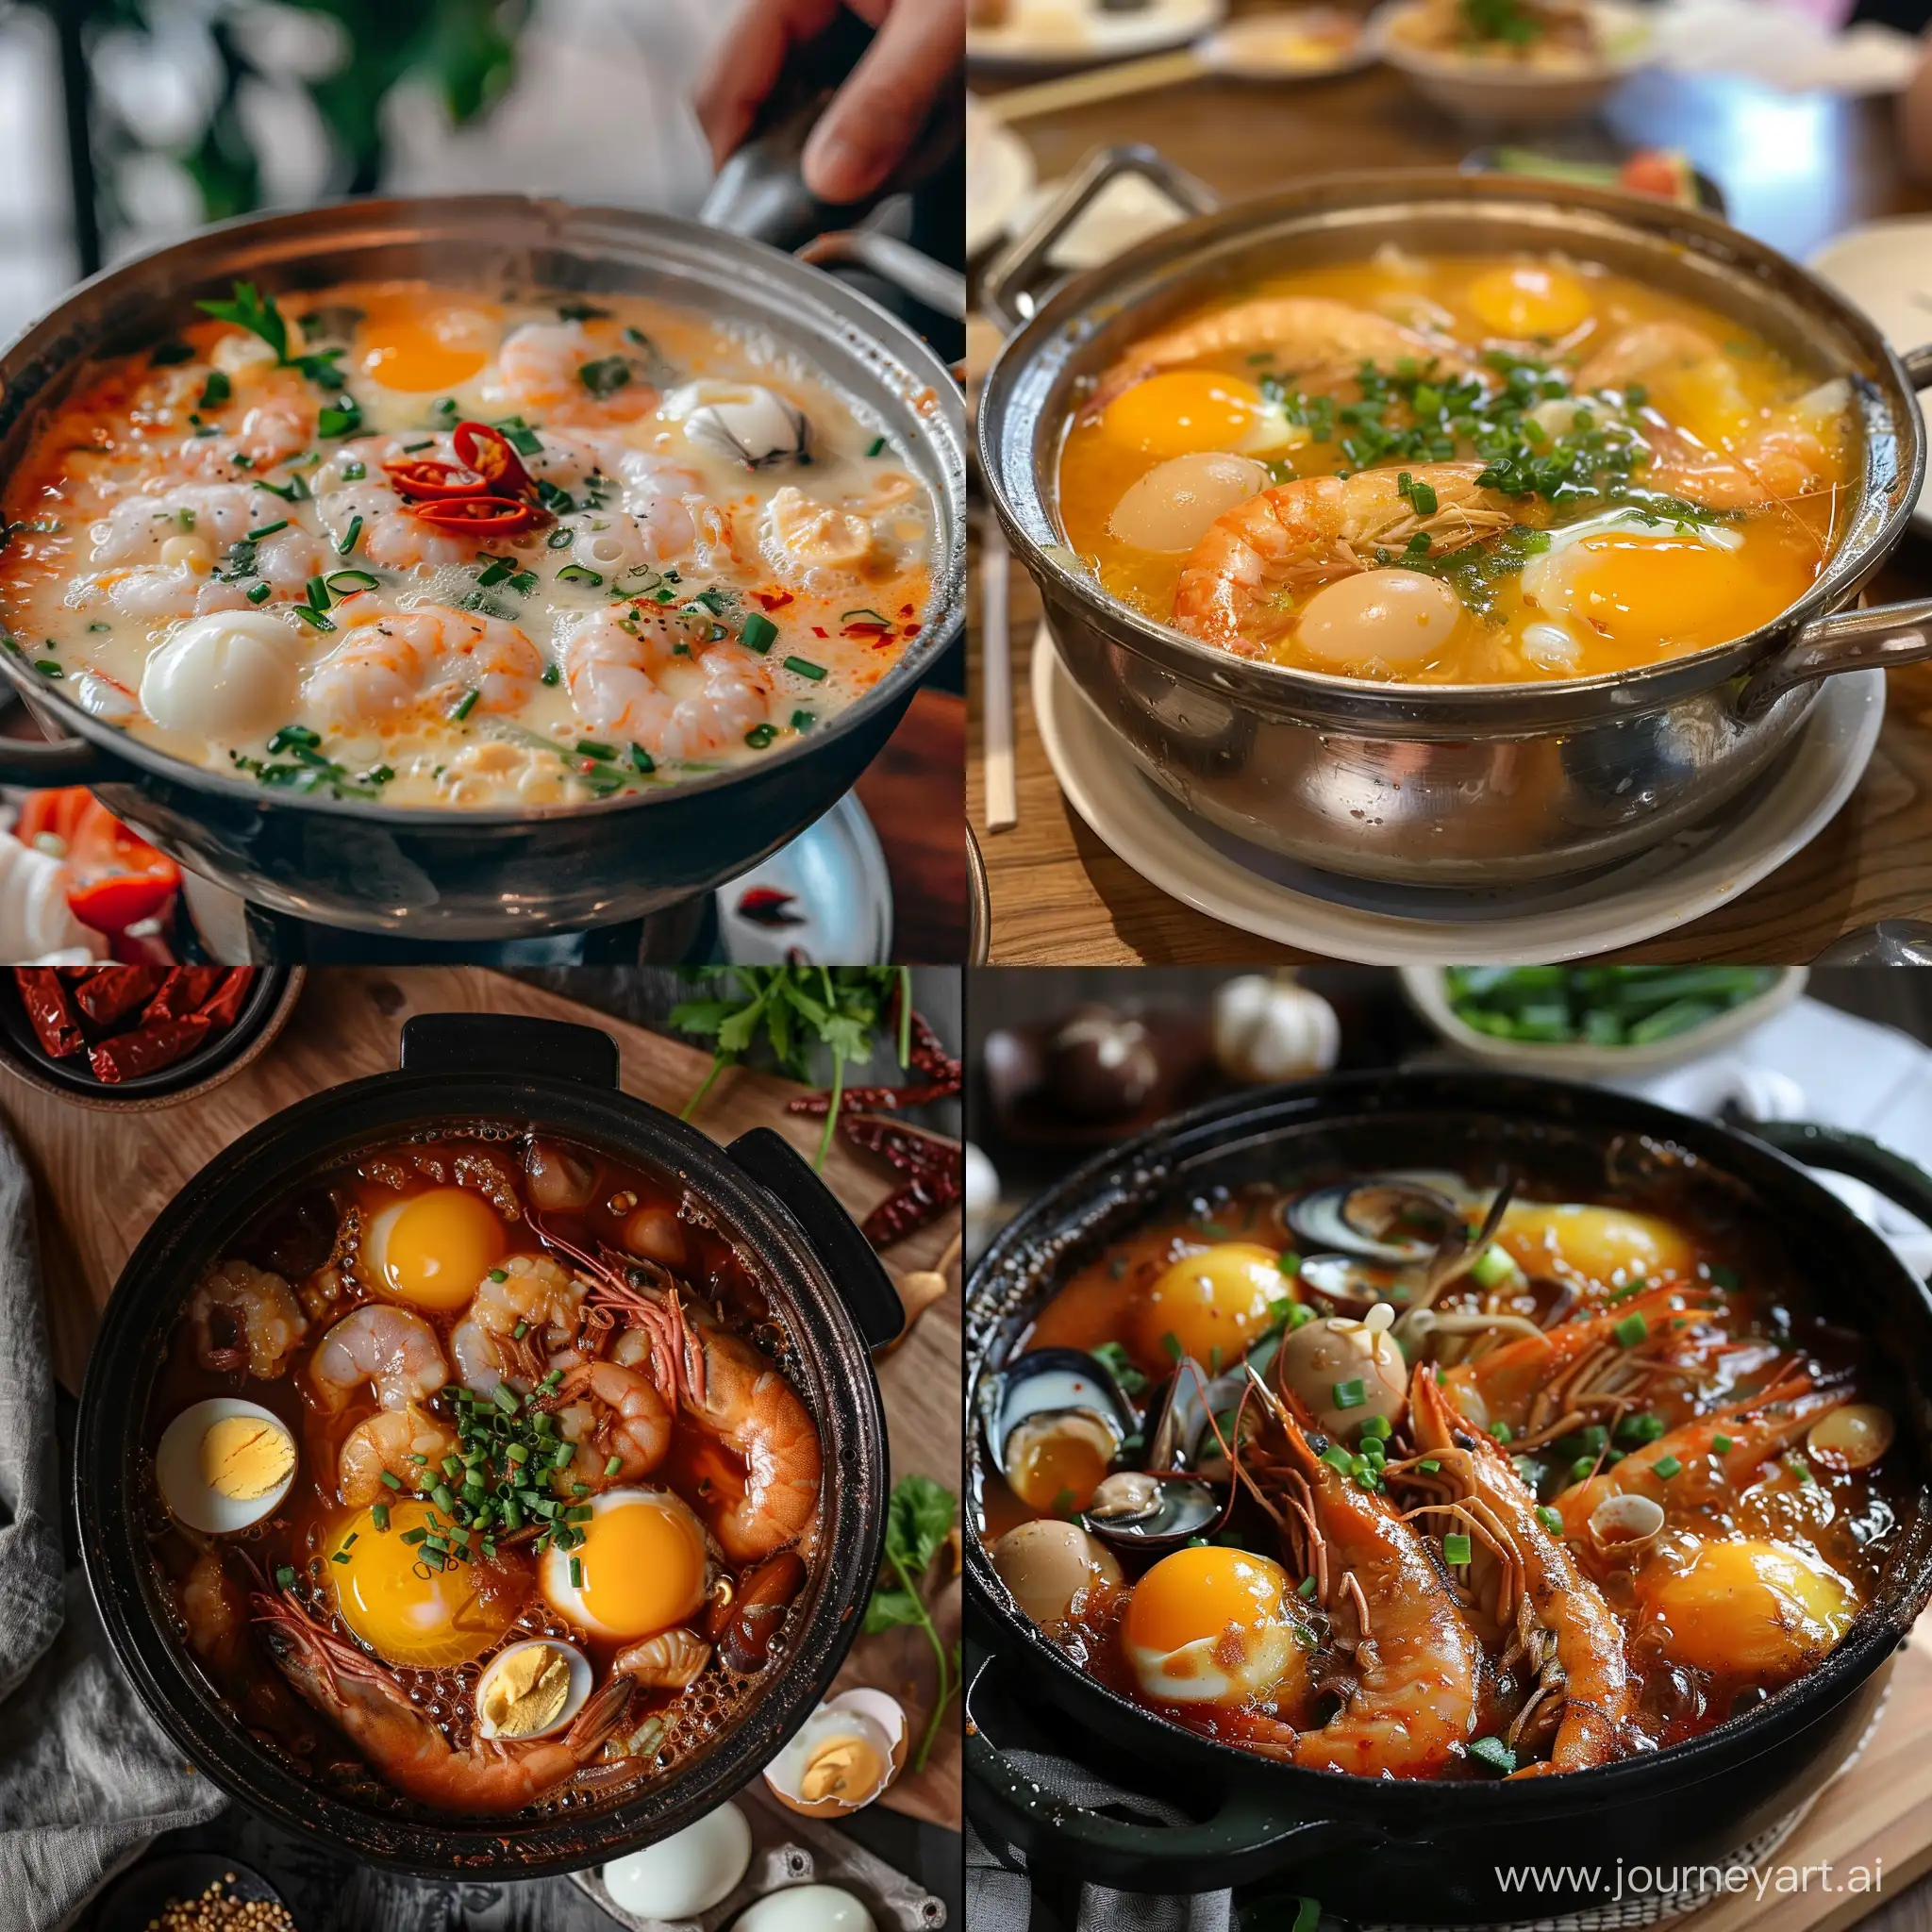 Delicious-Seafood-Steamed-Eggs-Hot-Pot